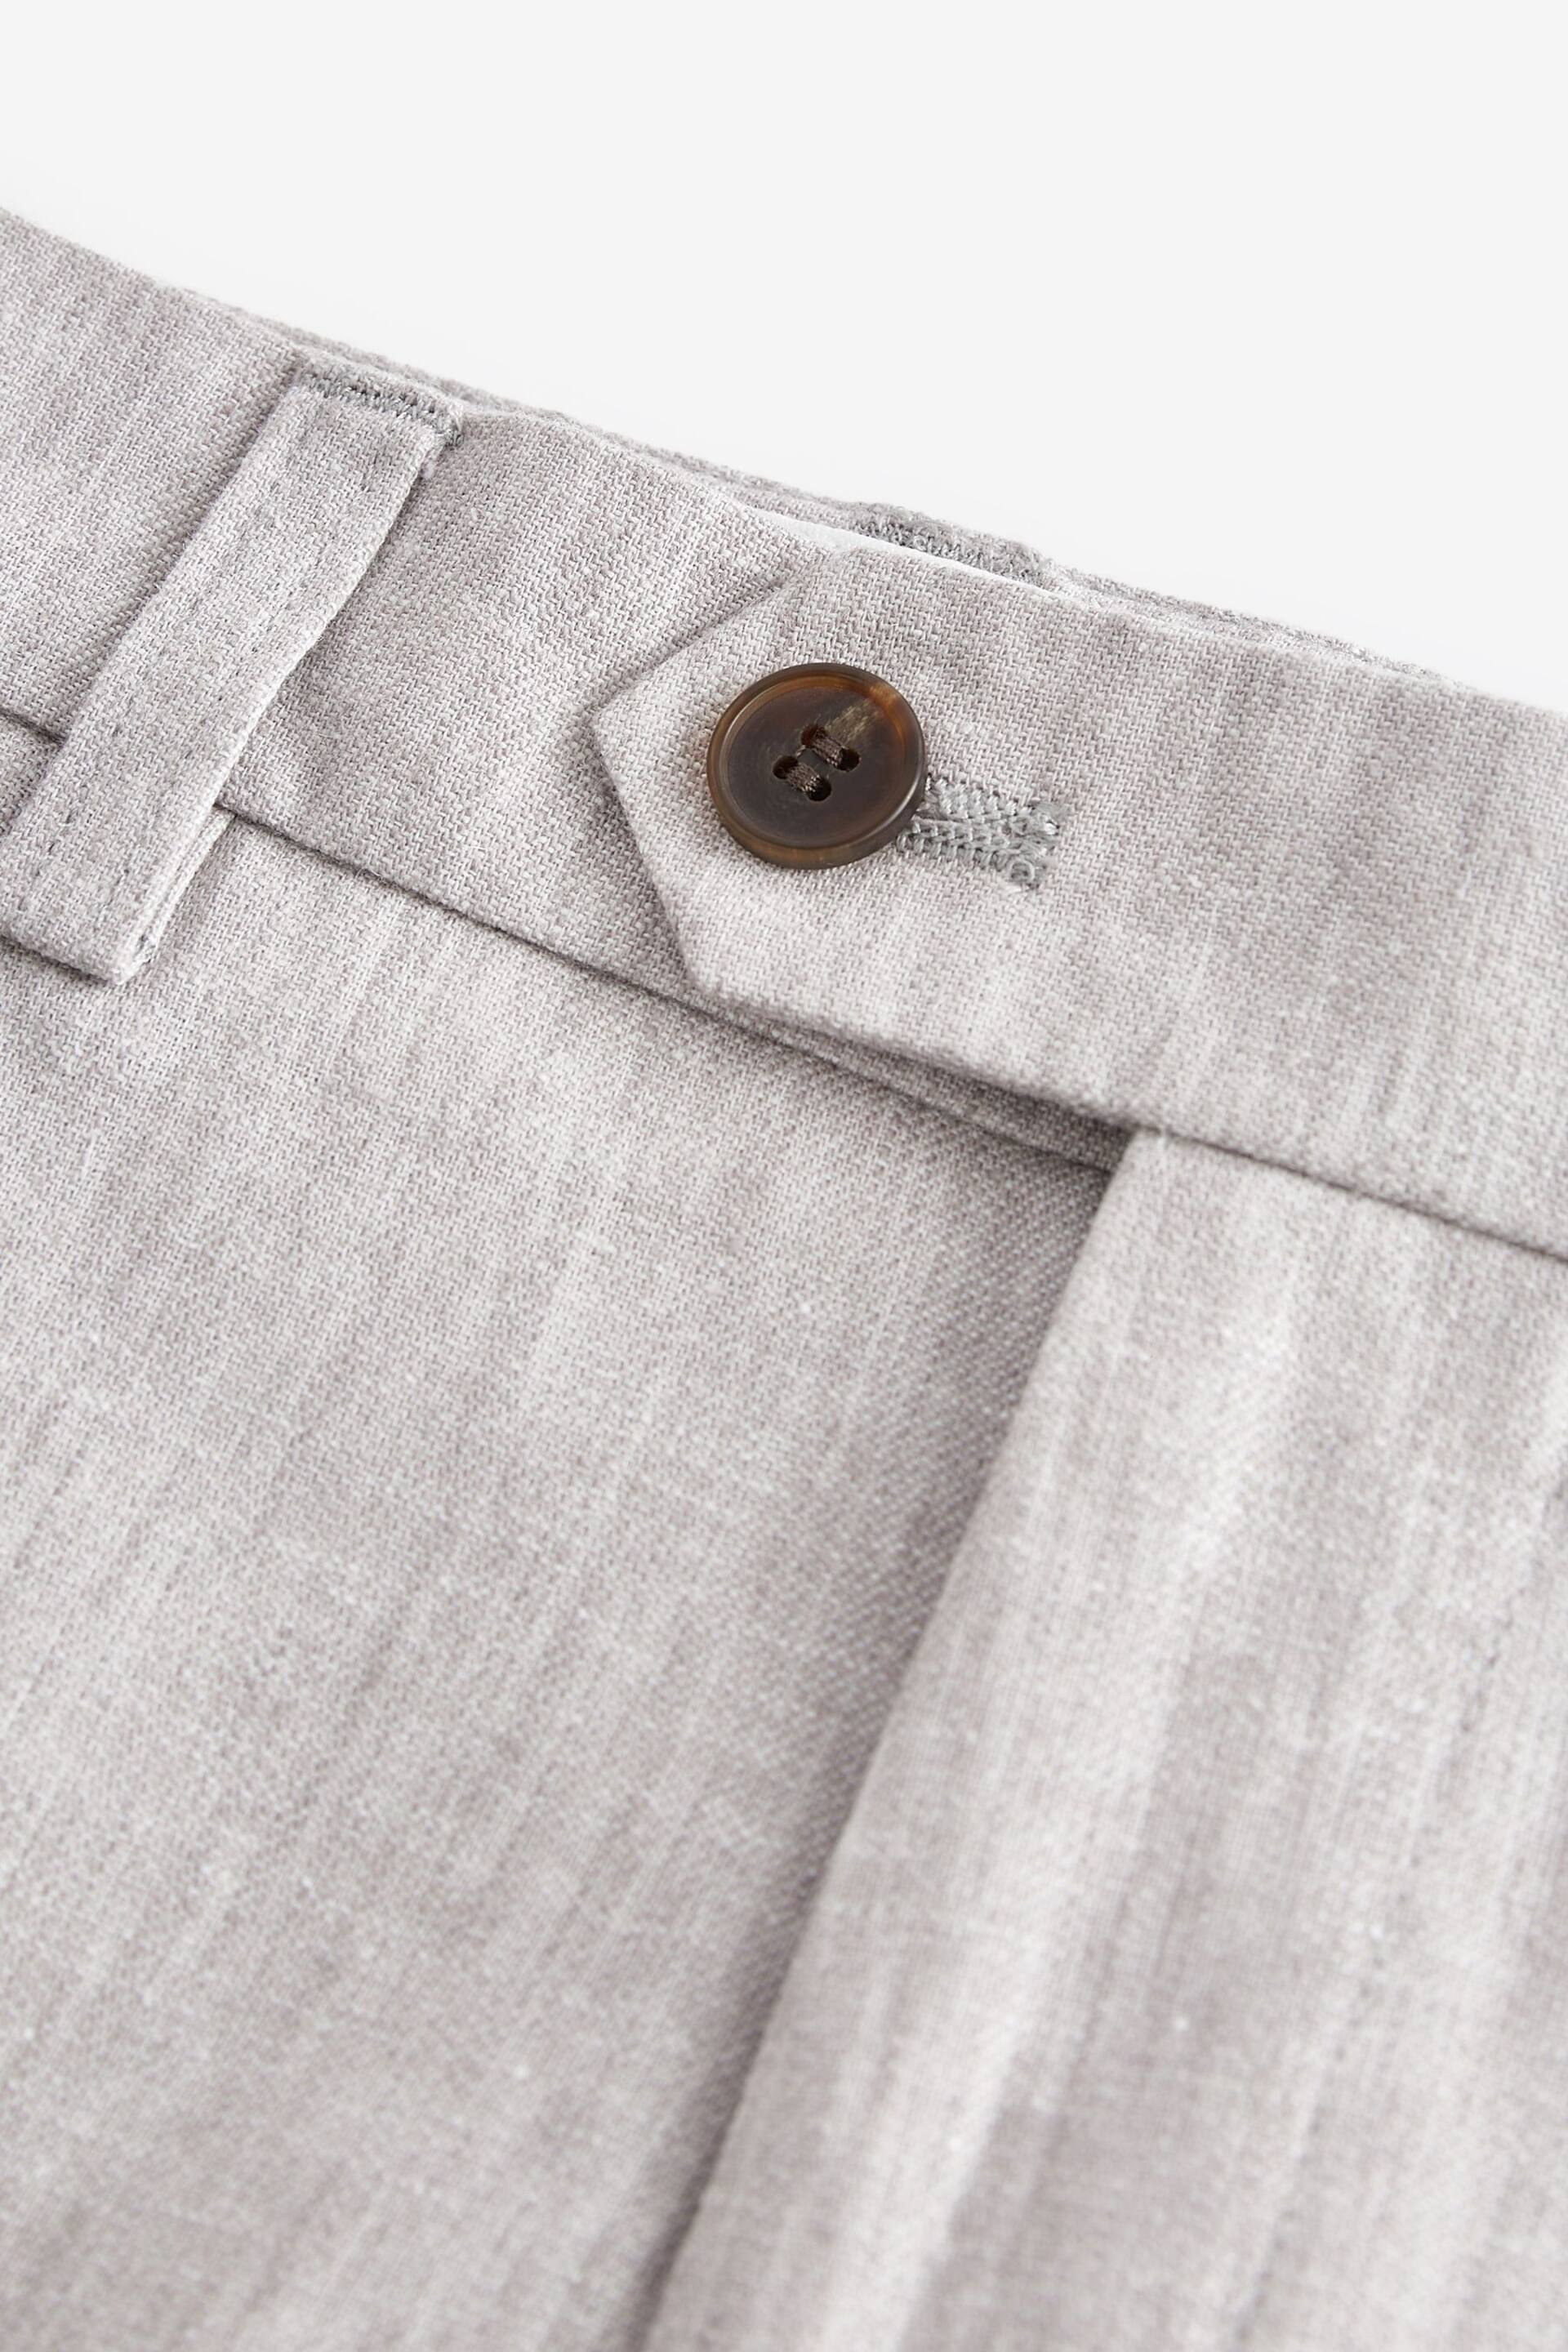 Grey Linen Blend Suit Trousers (12mths-16yrs) - Image 3 of 5